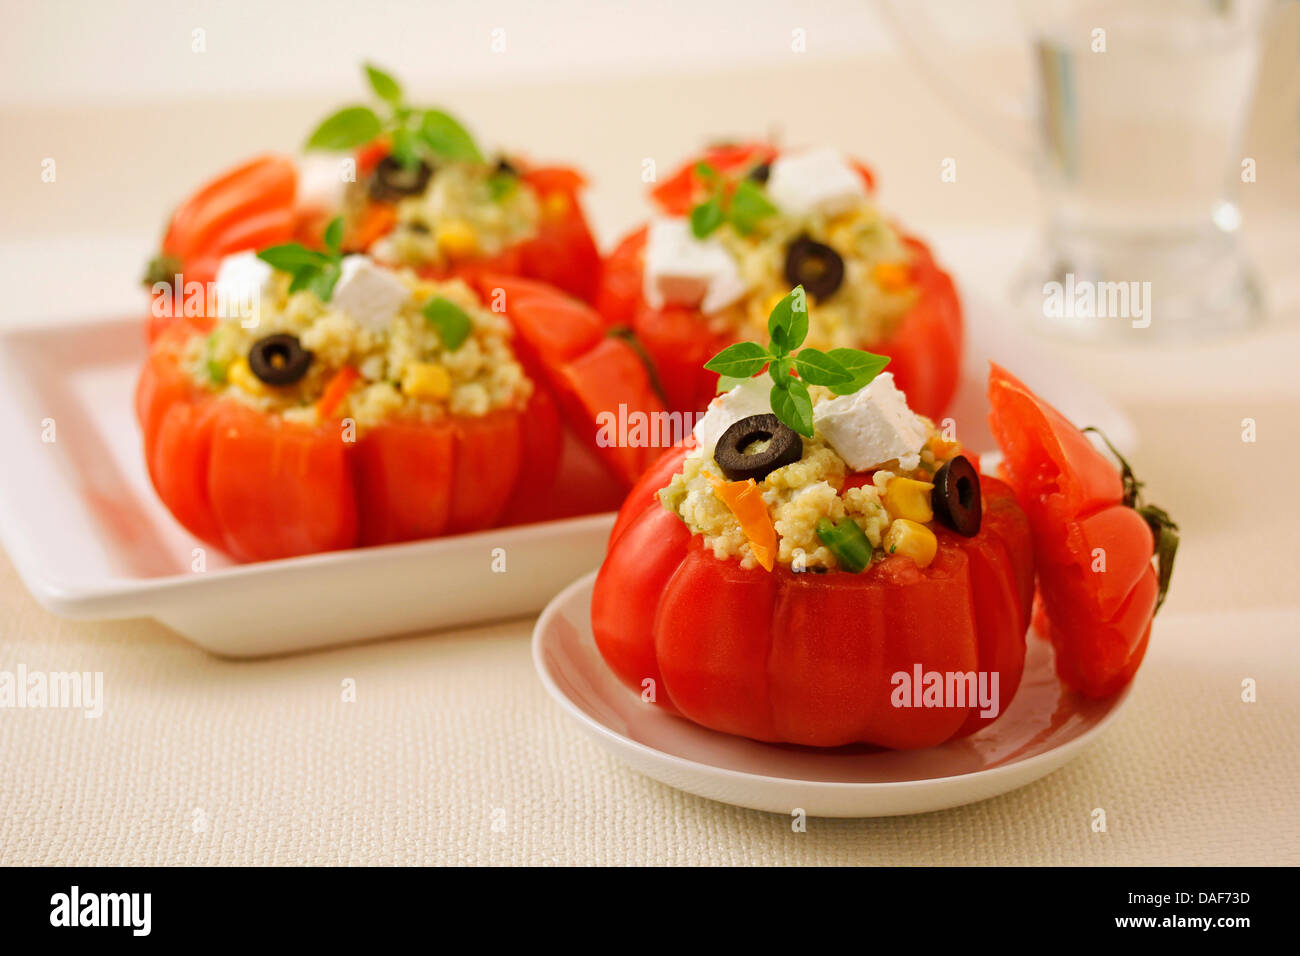 Stuffed tomatoes with millet. Recipe available. Stock Photo